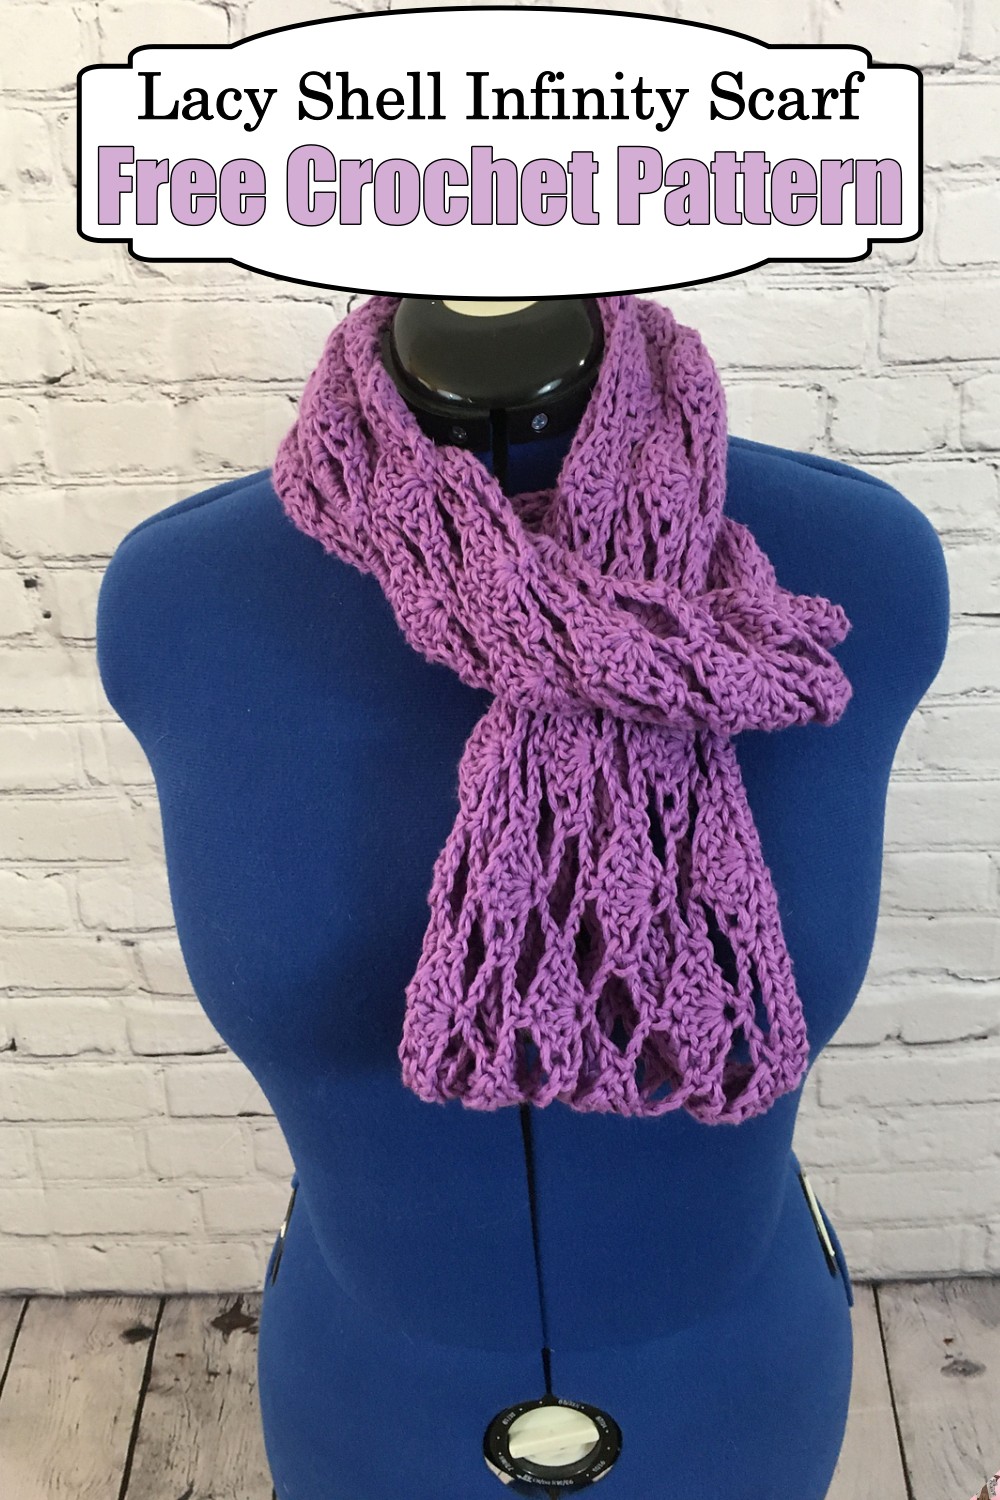 Lacy Shell Infinity Scarf